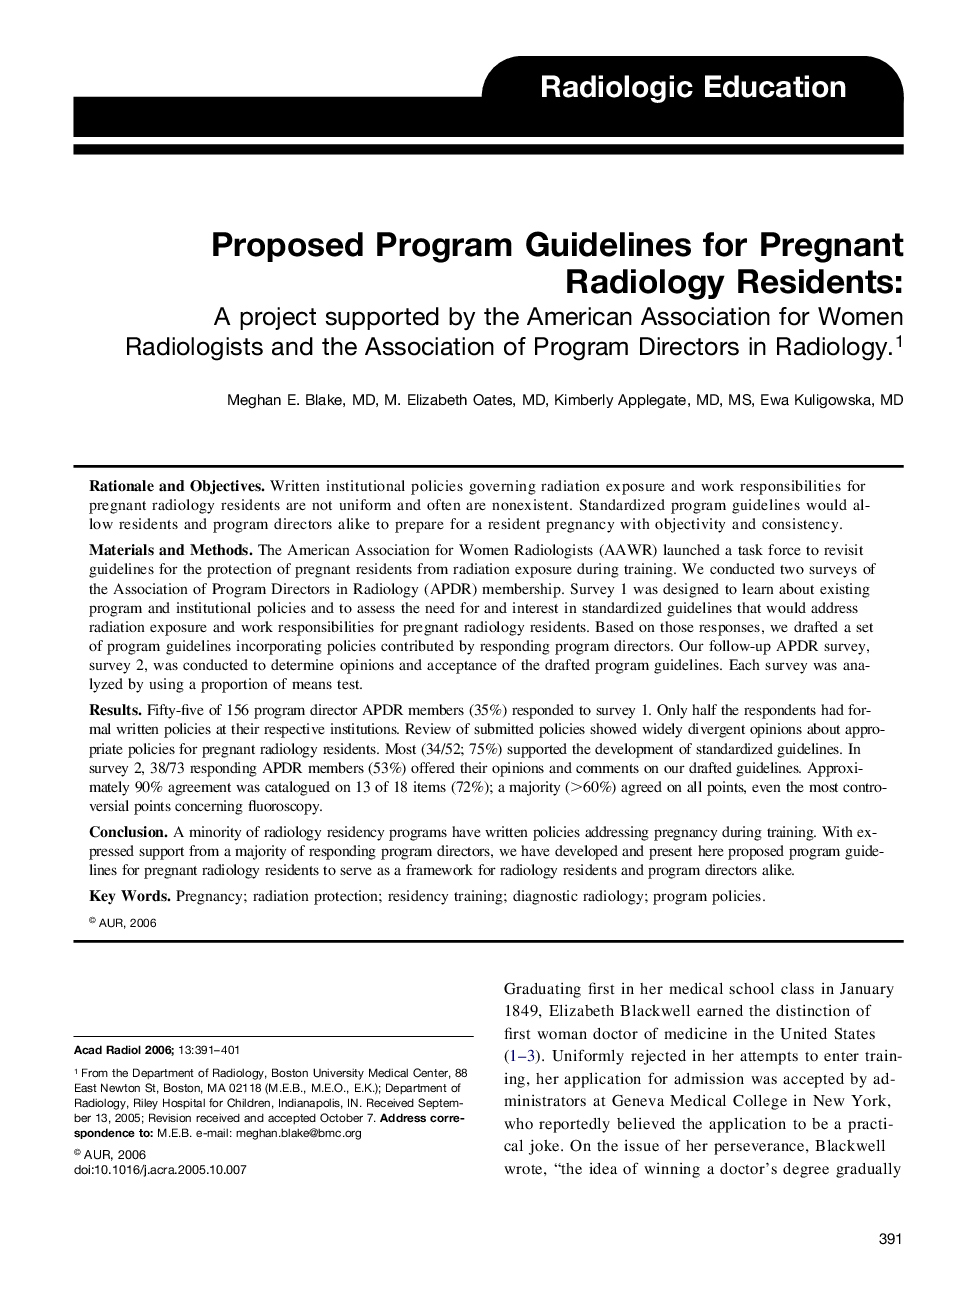 Proposed Program Guidelines for Pregnant Radiology Residents